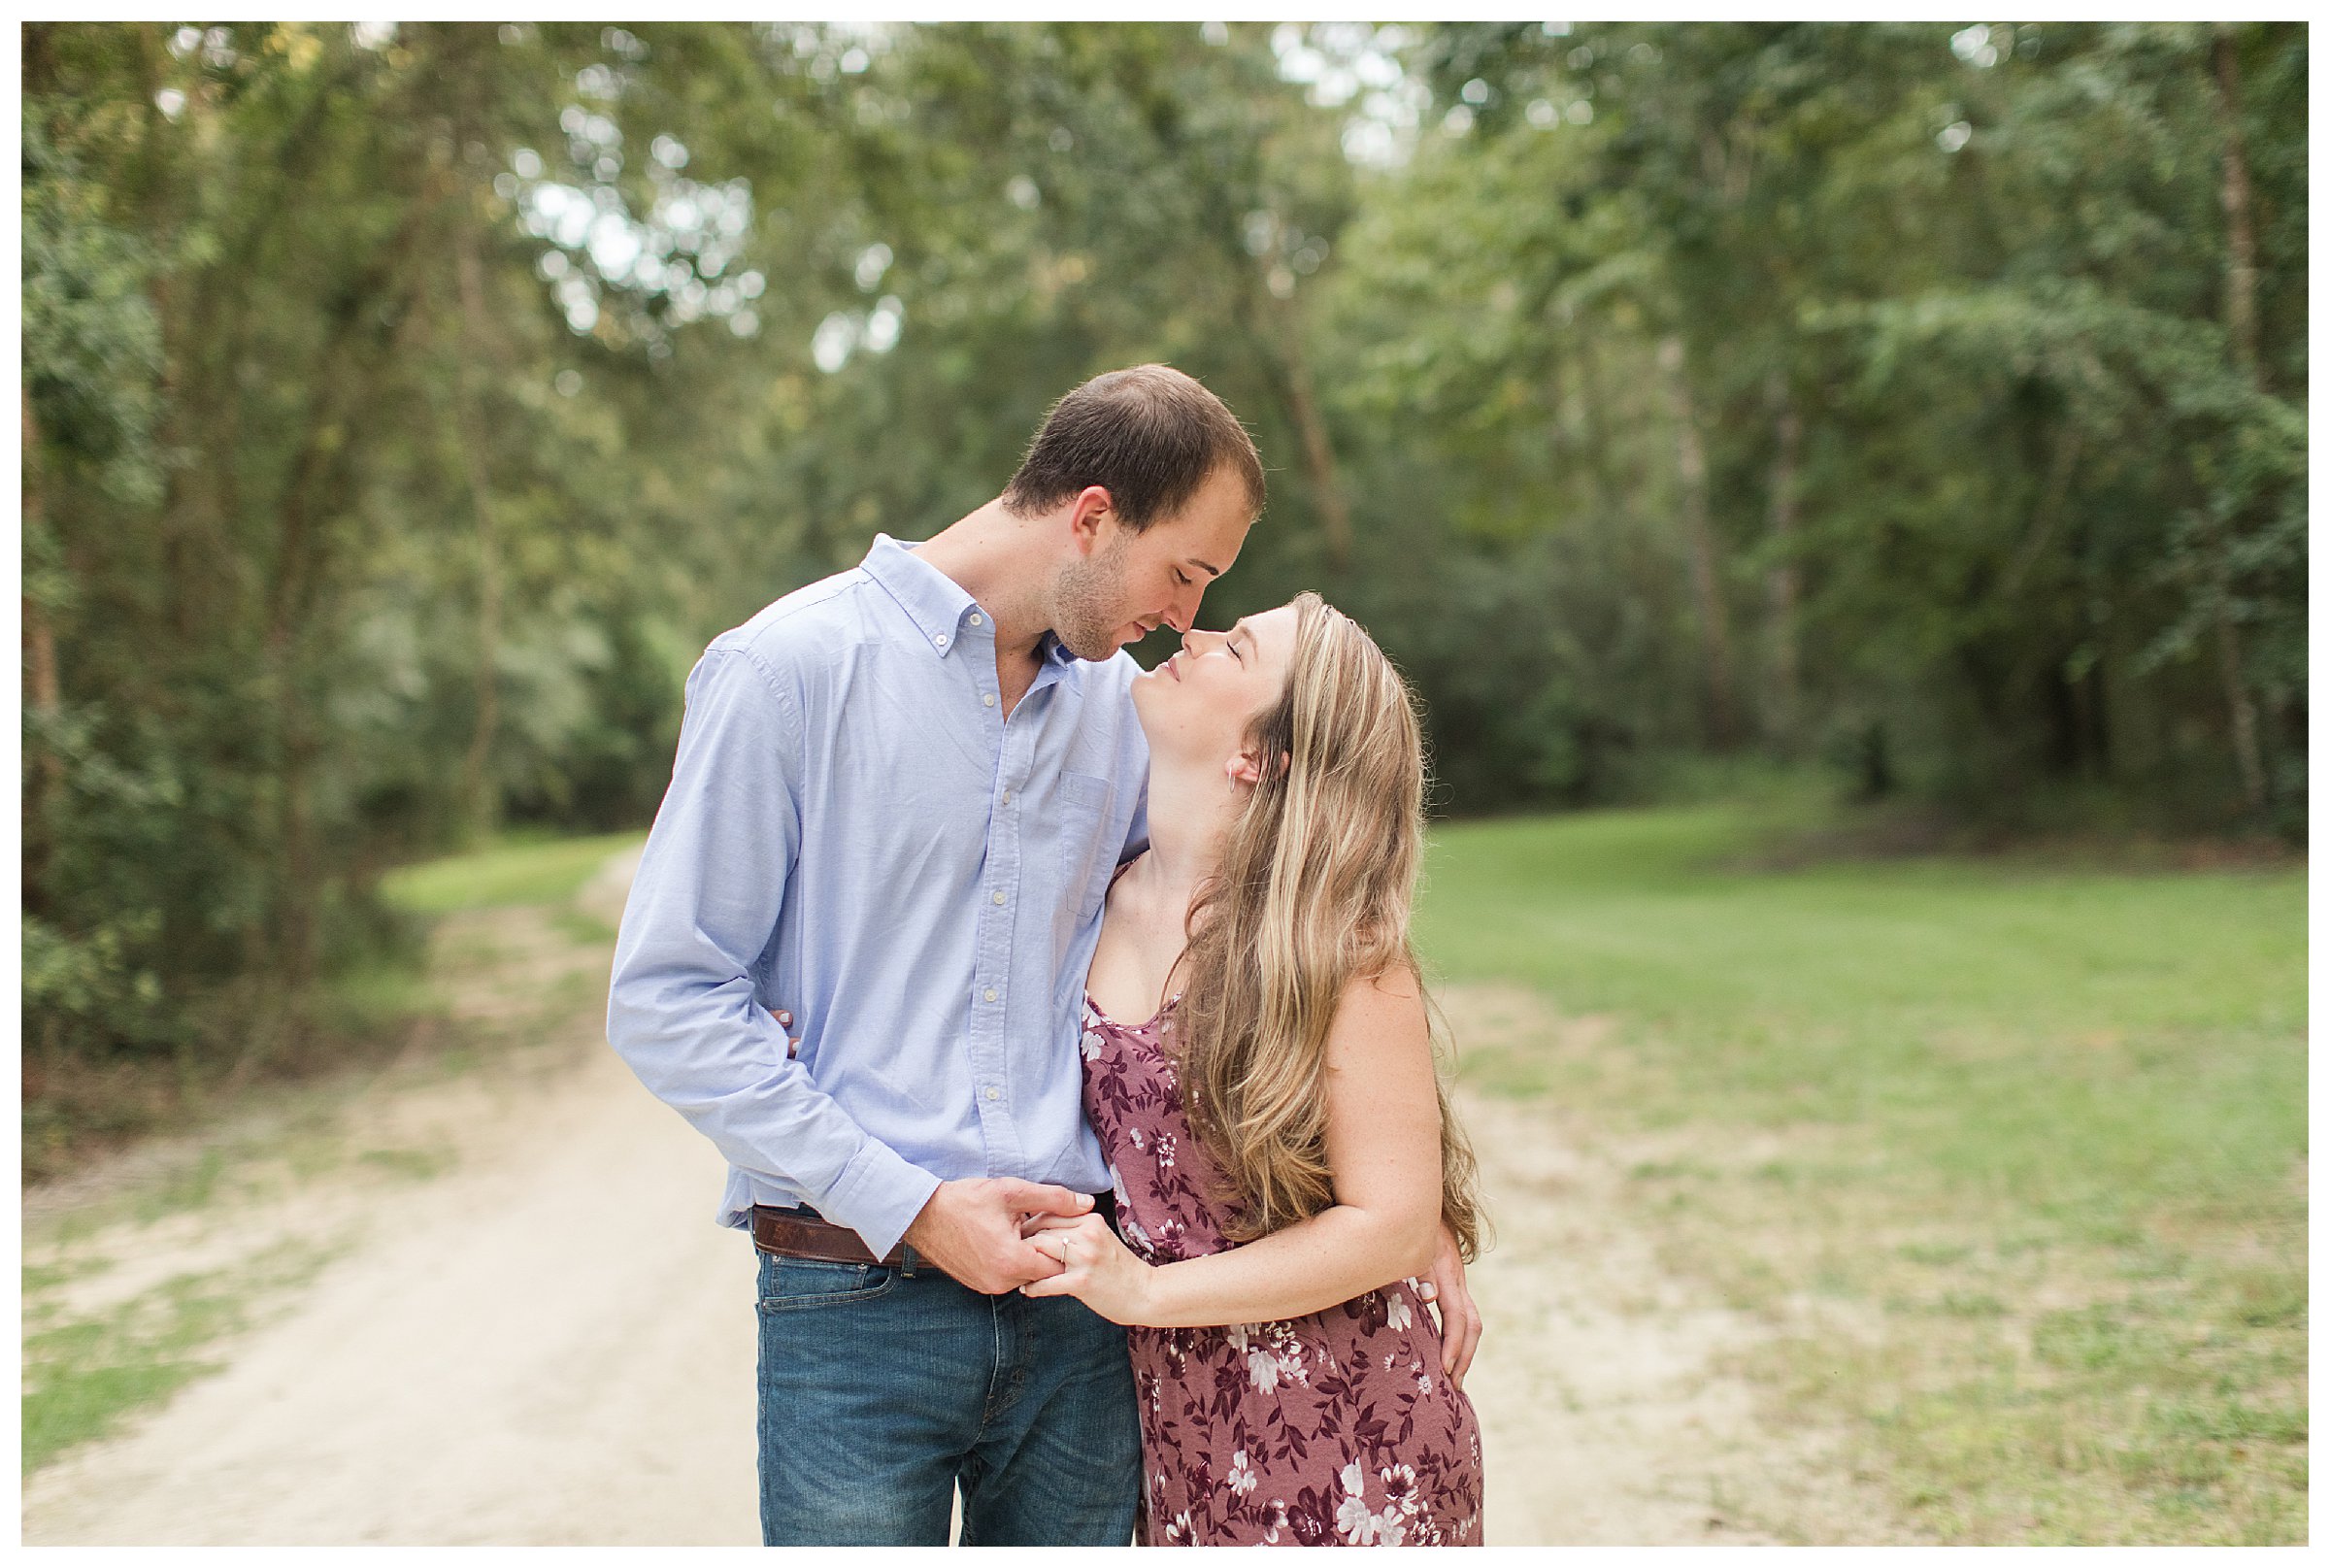 Lewiswood Farm Engagement Session, Tallahassee FL, Kelley Stinson Photography